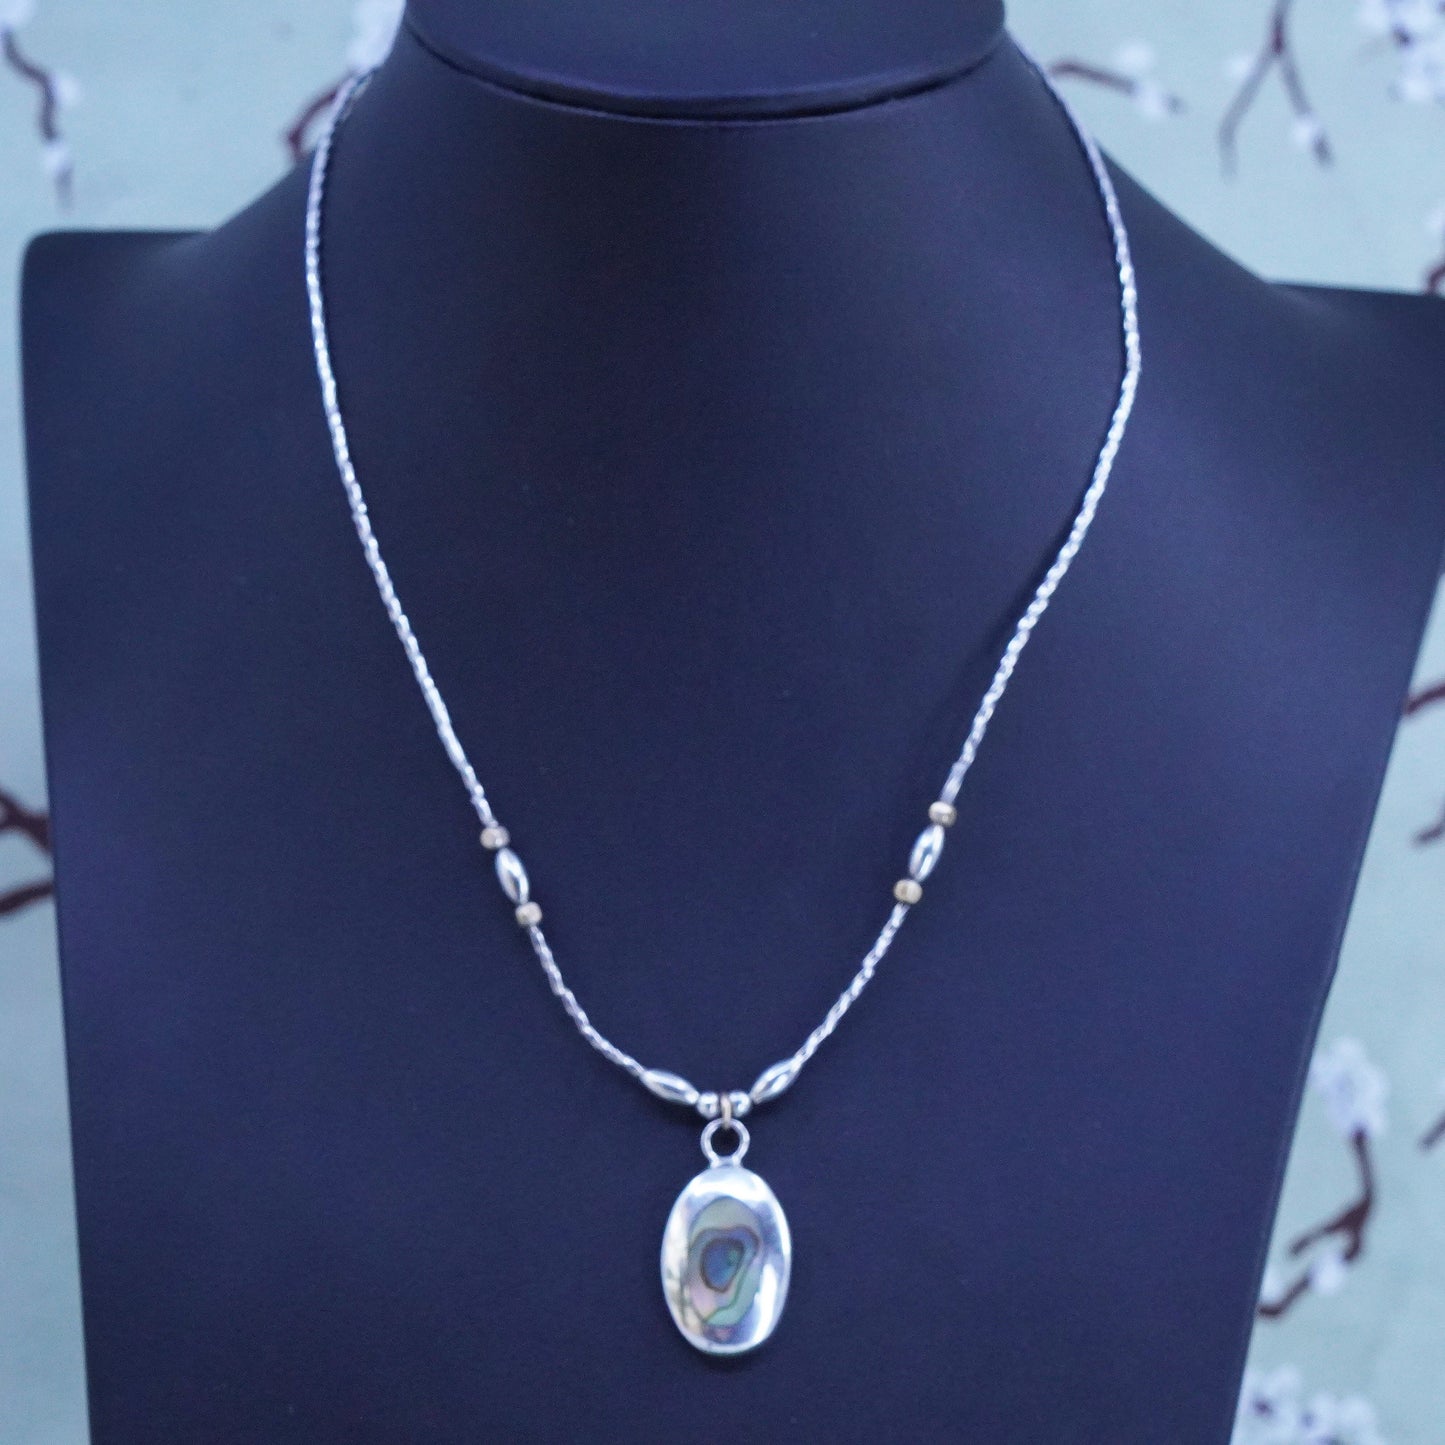 16", 1mm, sterling silver necklace, liquid silver chain with abalone pendant